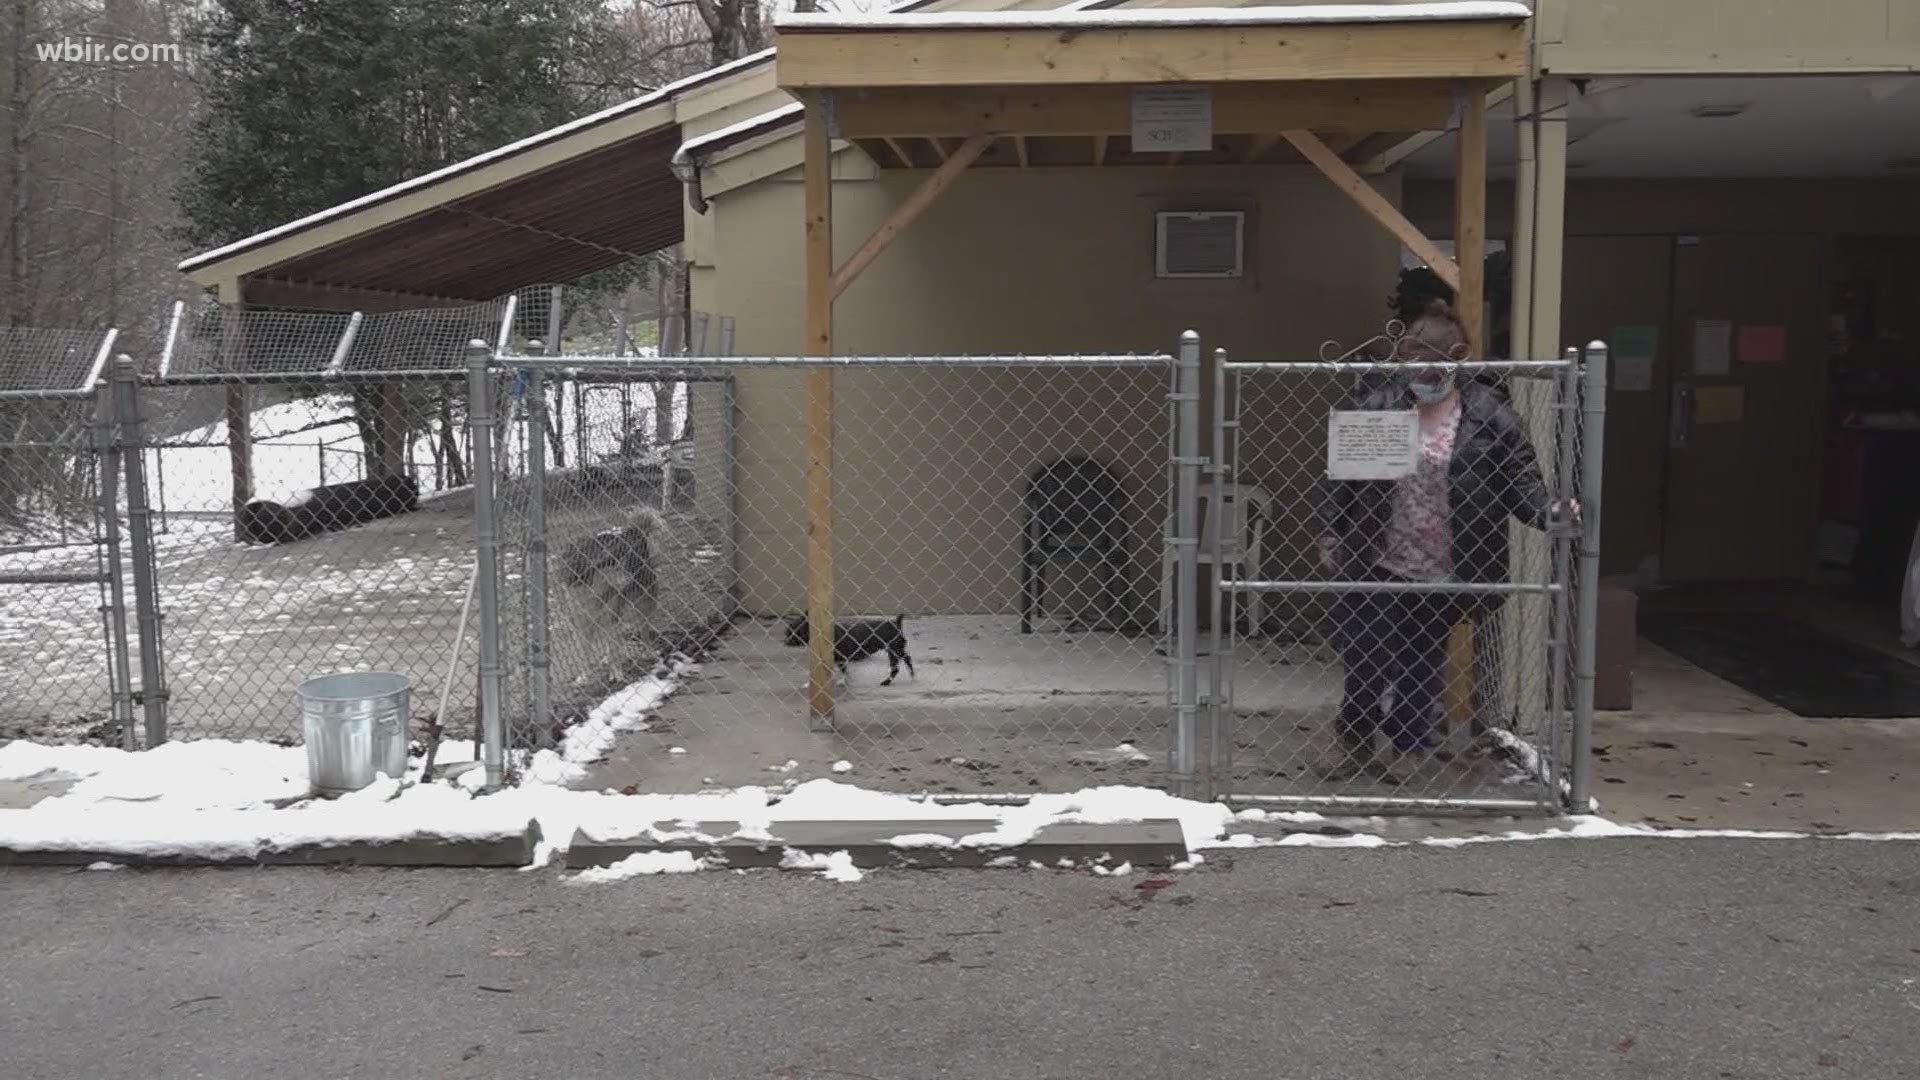 Power is now back on at the Sevier County Humane Society after it first went out on Christmas Eve.